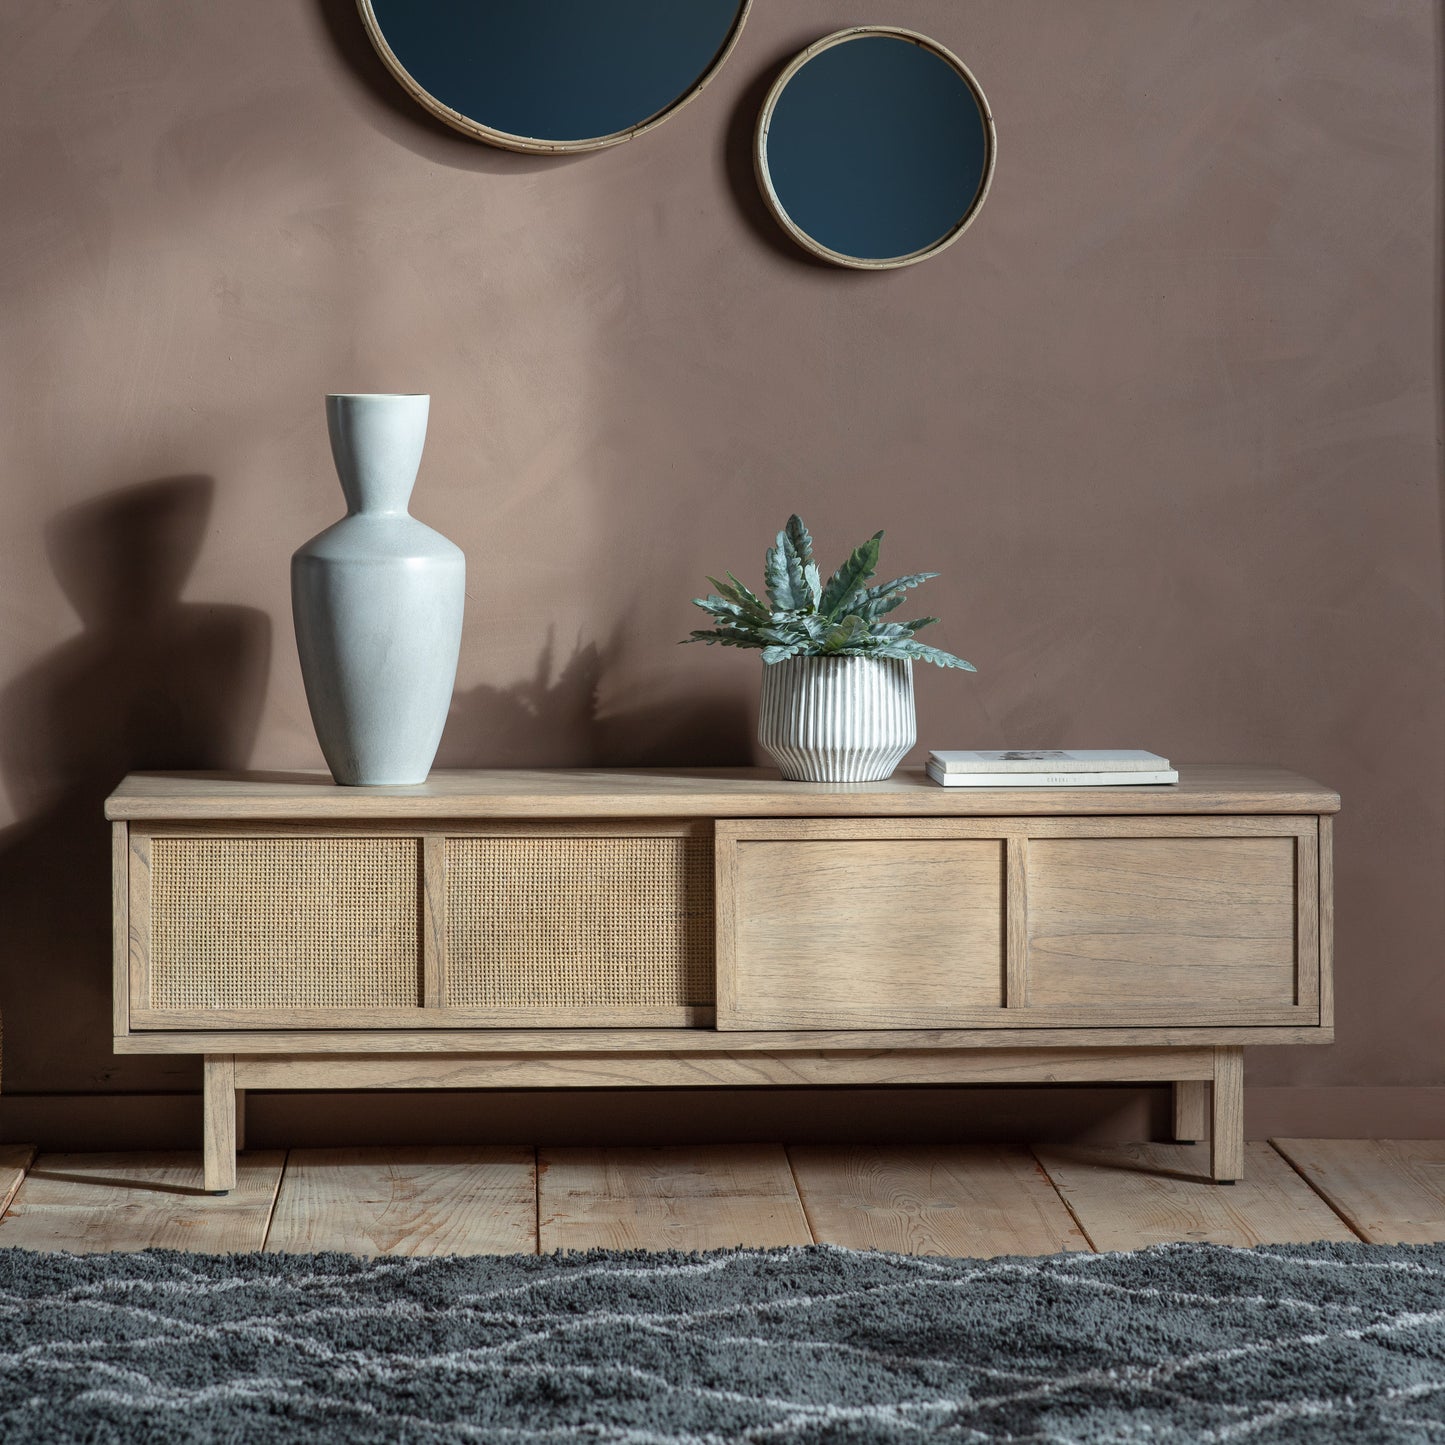 An Alvington Media Unit from Kikiathome.co.uk, an interior decor piece for home furniture, adorned with a plant and a mirror.